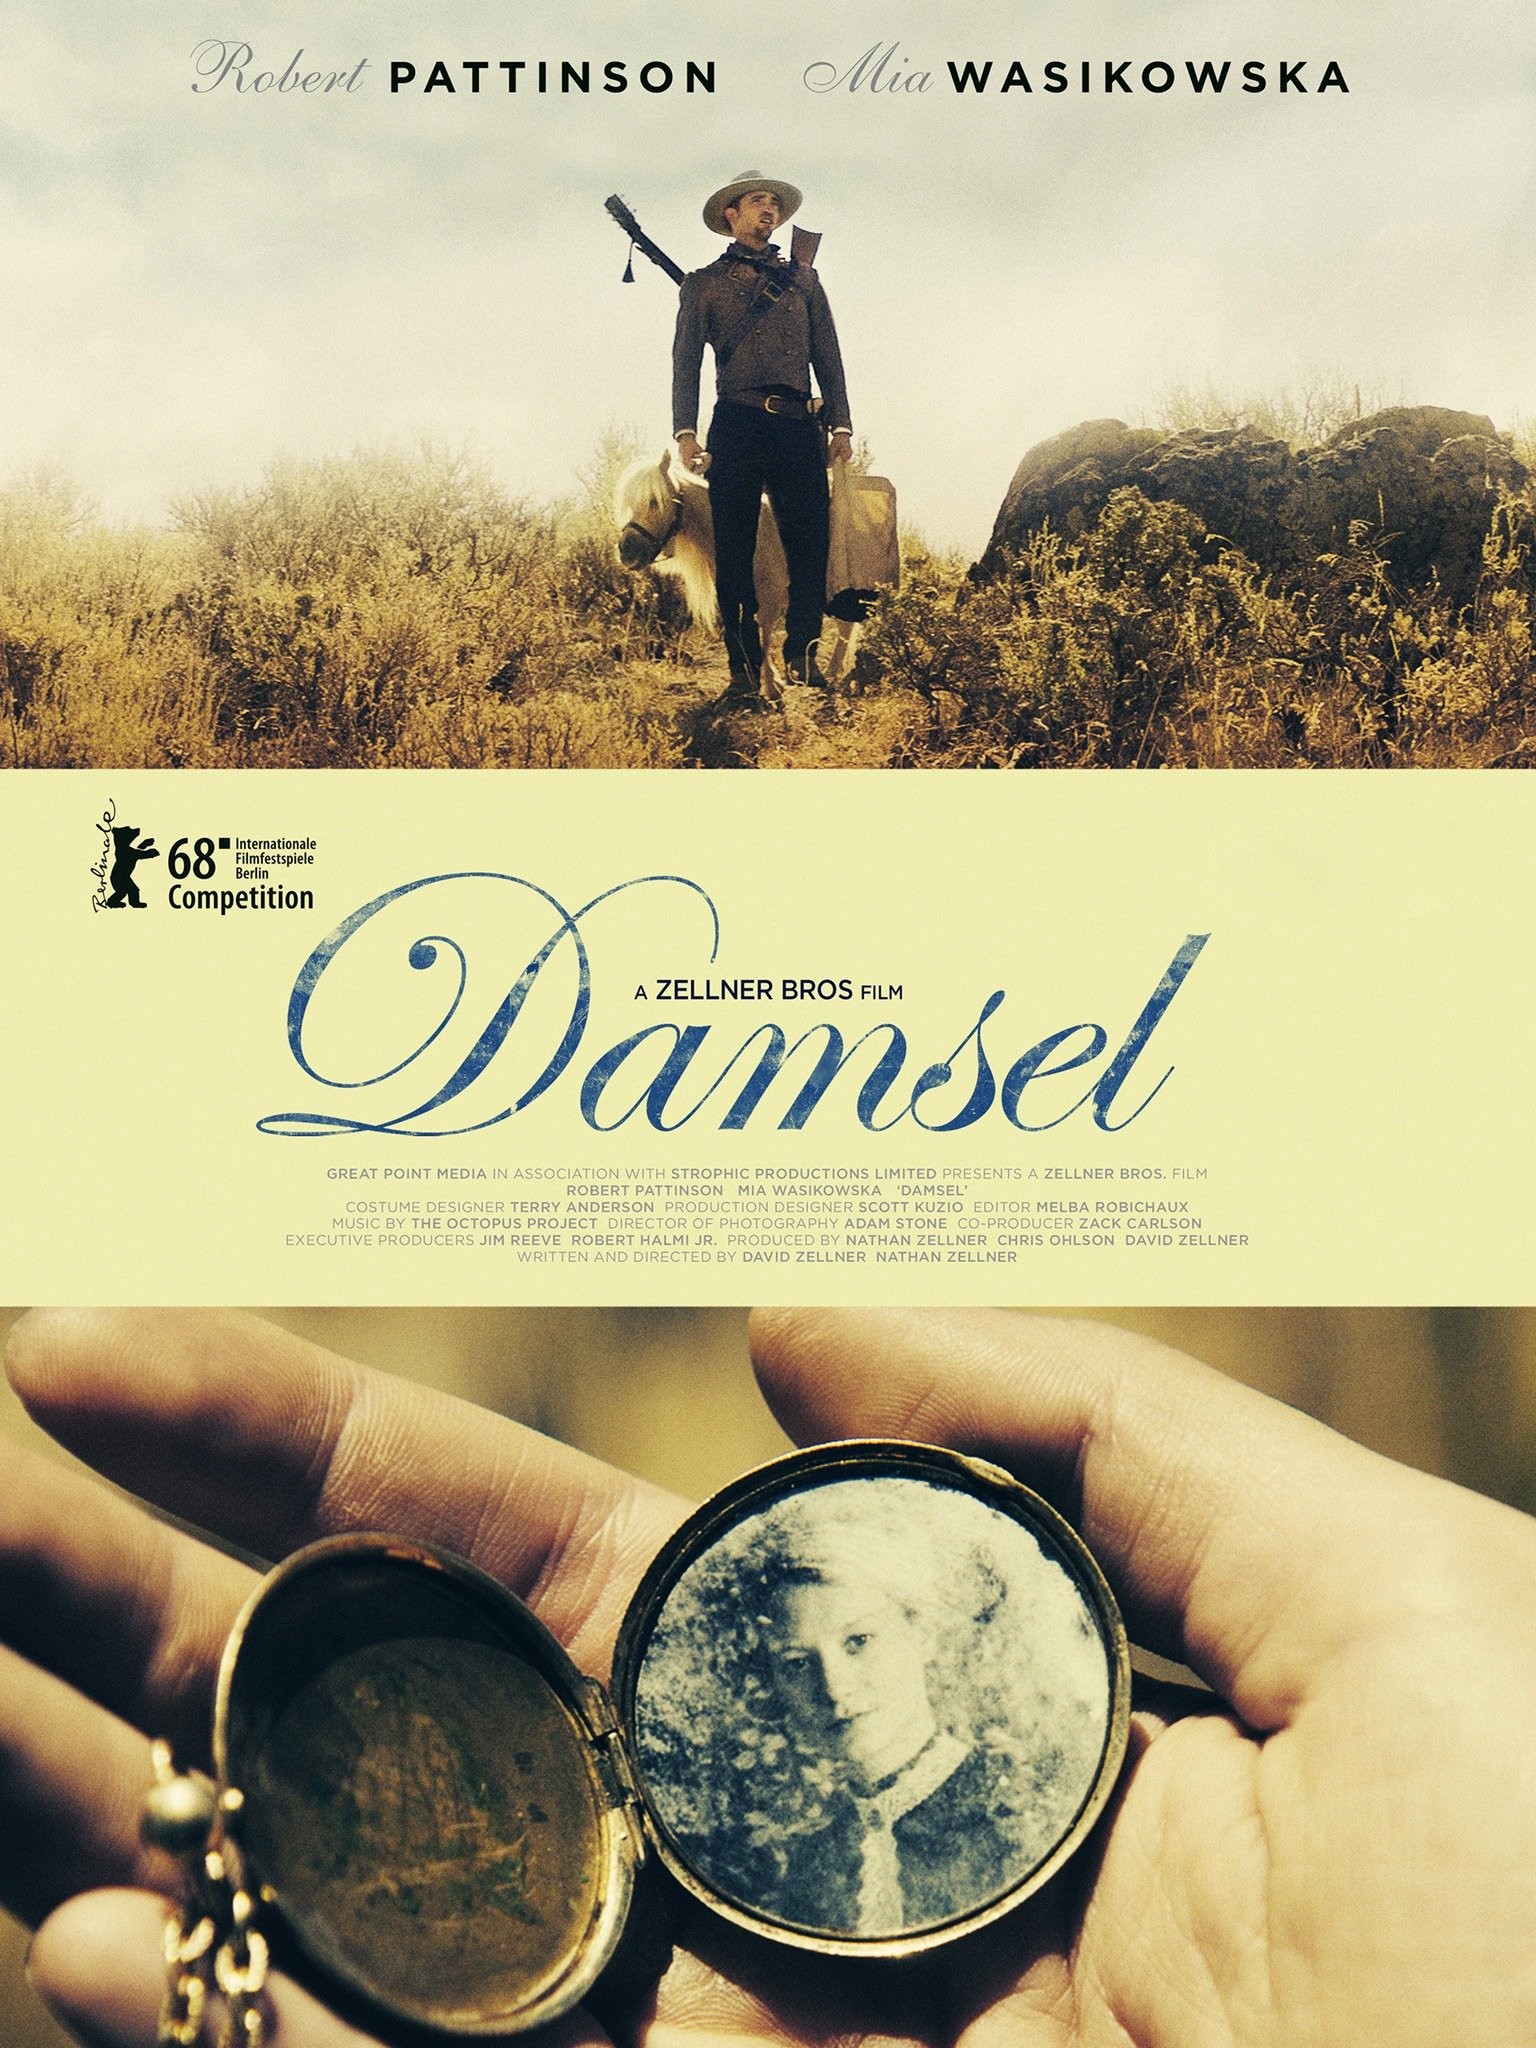 Damsel  Release date, cast, and latest news for Netflix film